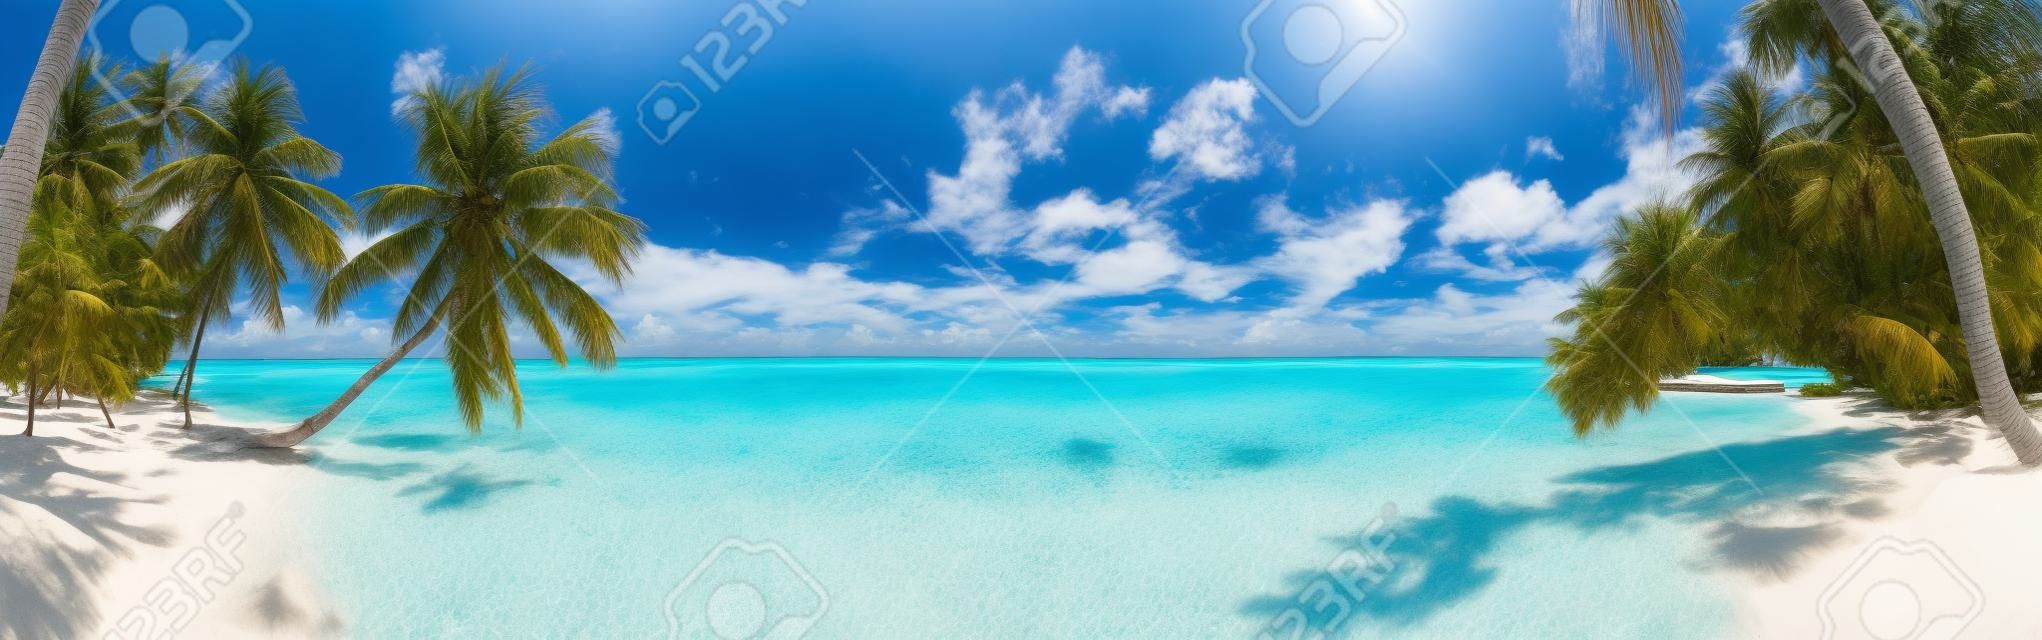 Beach panorama at Maldives with blue sky, palm trees and turquoise water